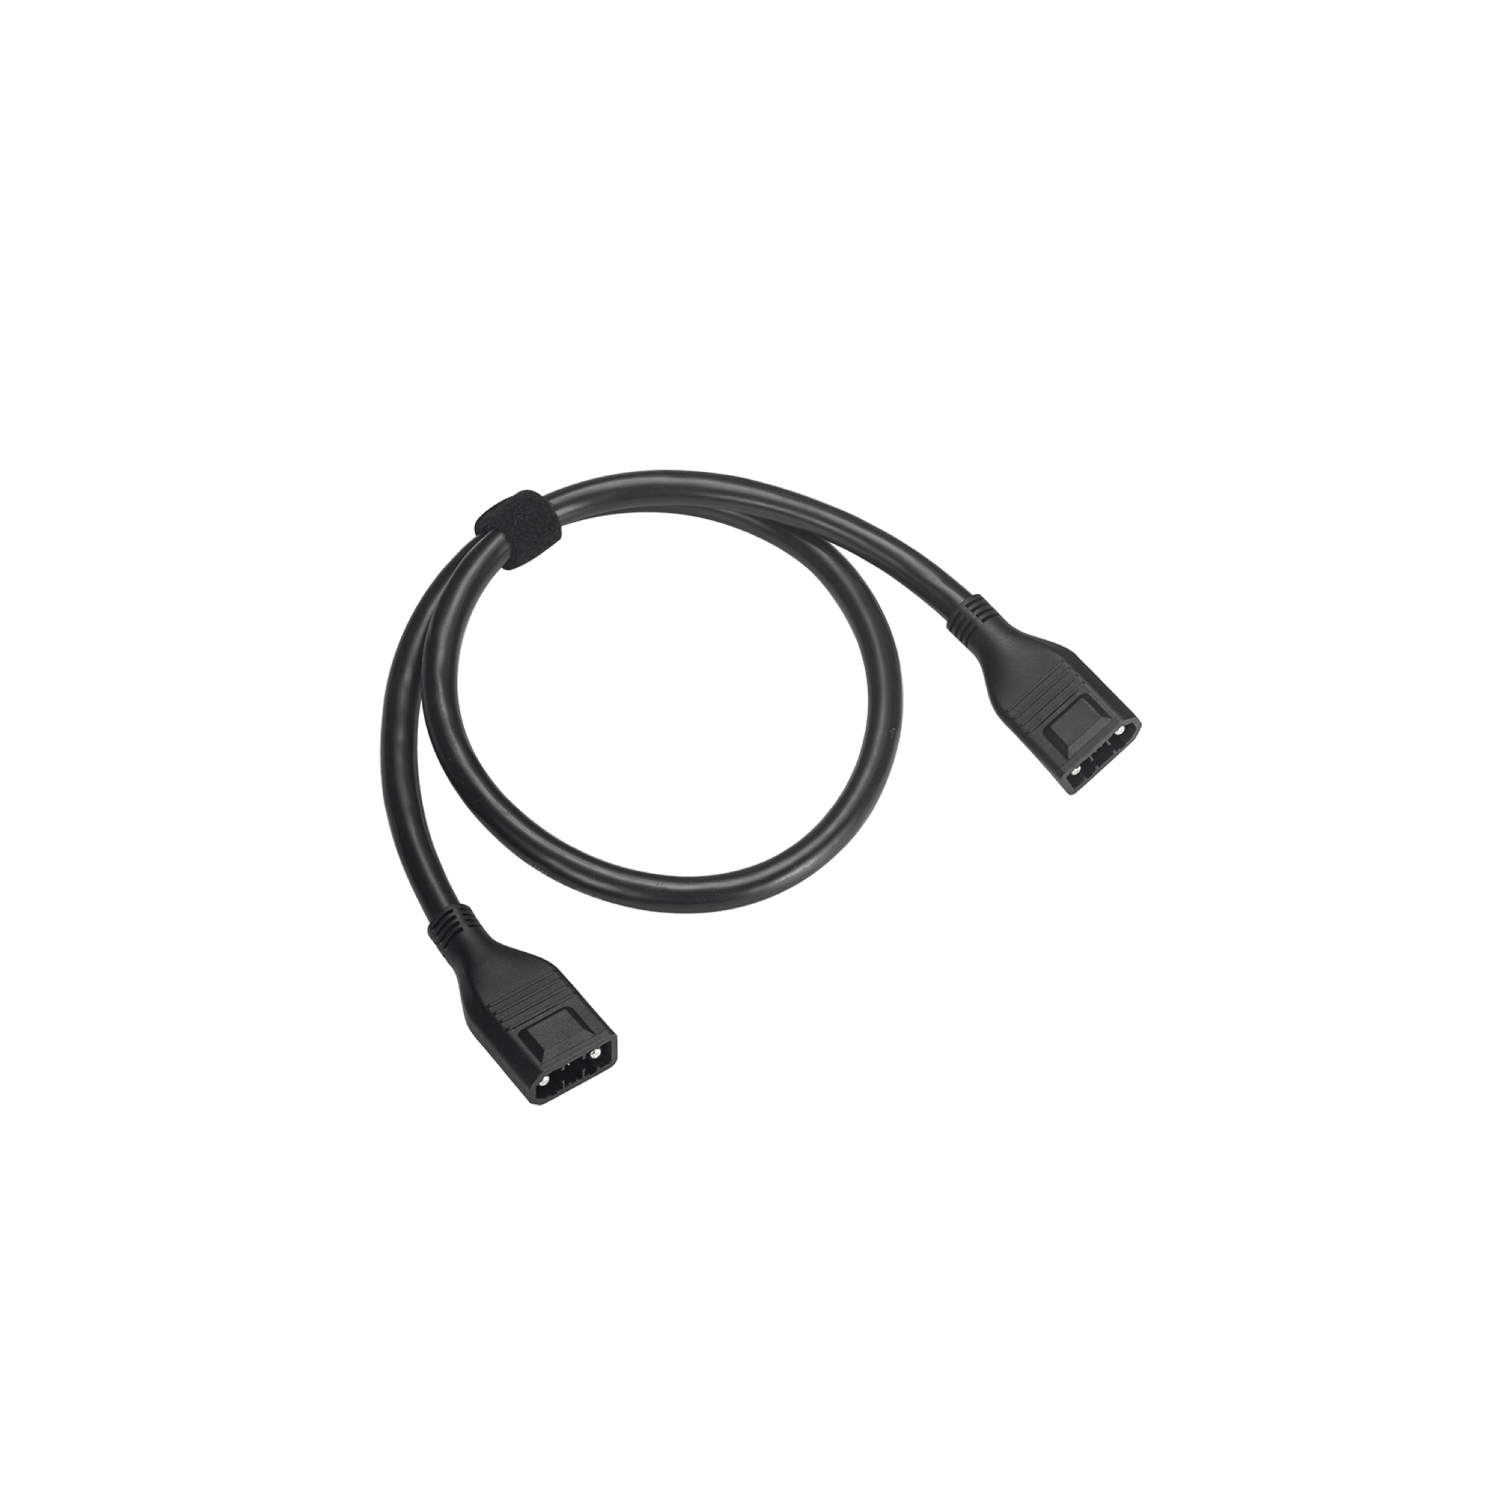 EcoFlow MC4 to XT60i Solar Charging Cable (2.5M) – Power and Portable